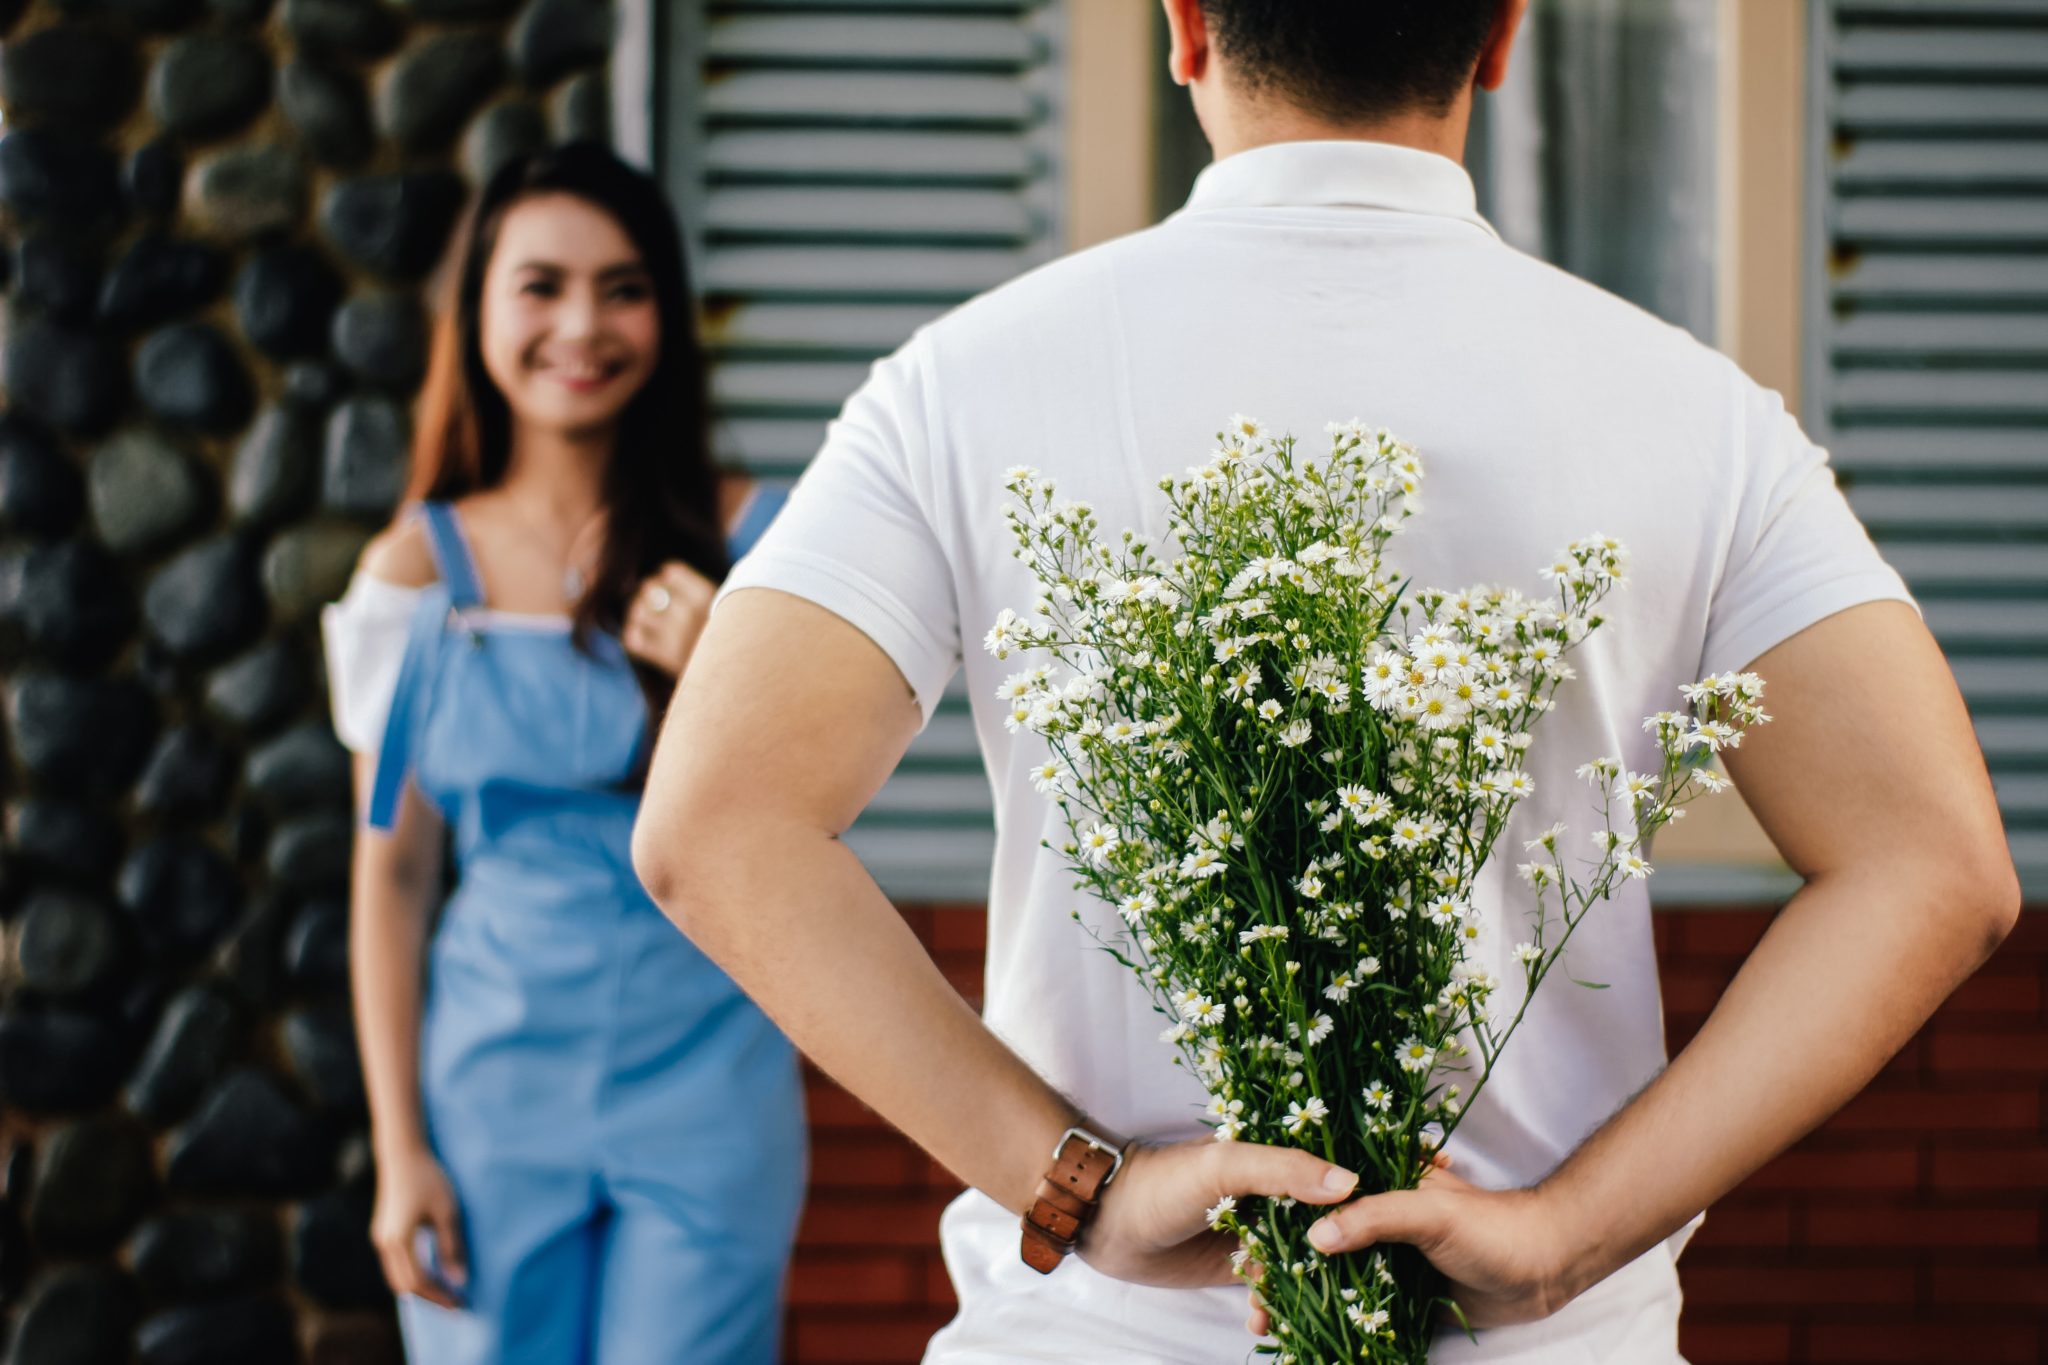 Man holding flowers to surprise wife for date night